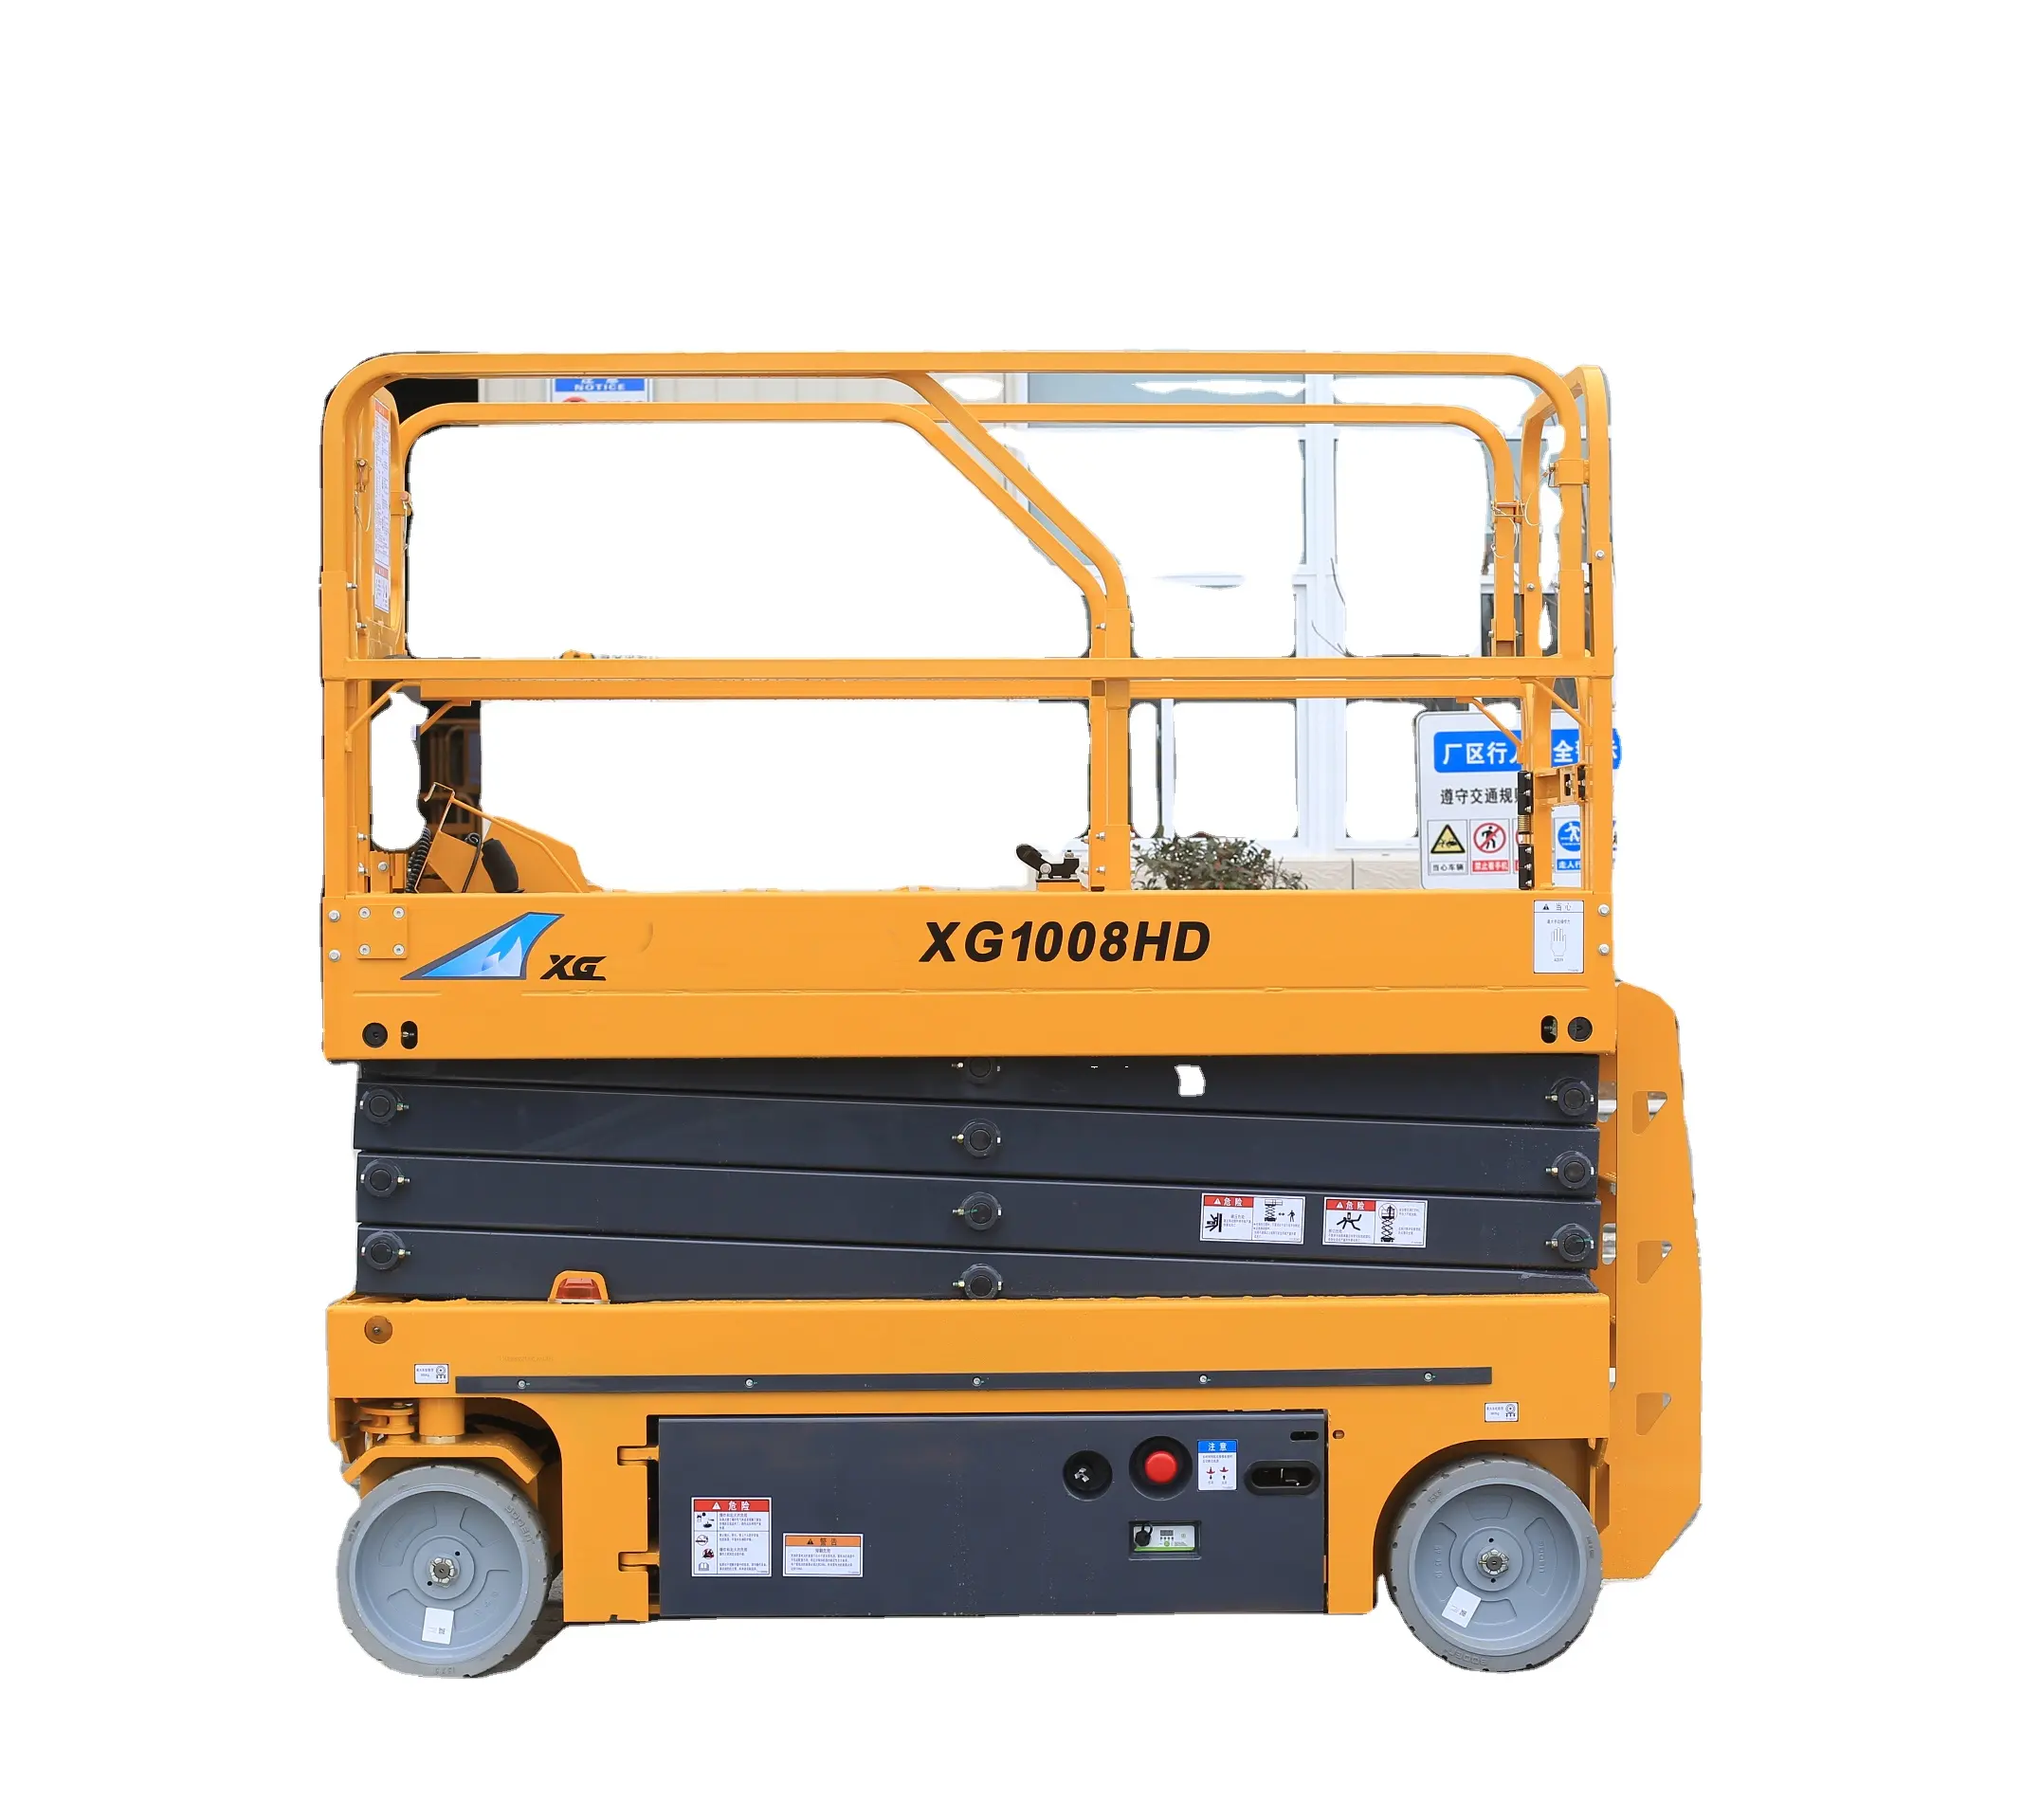 Reliable quality Self-propelled aerial work trucks and scissor aerial work platforms available in the city